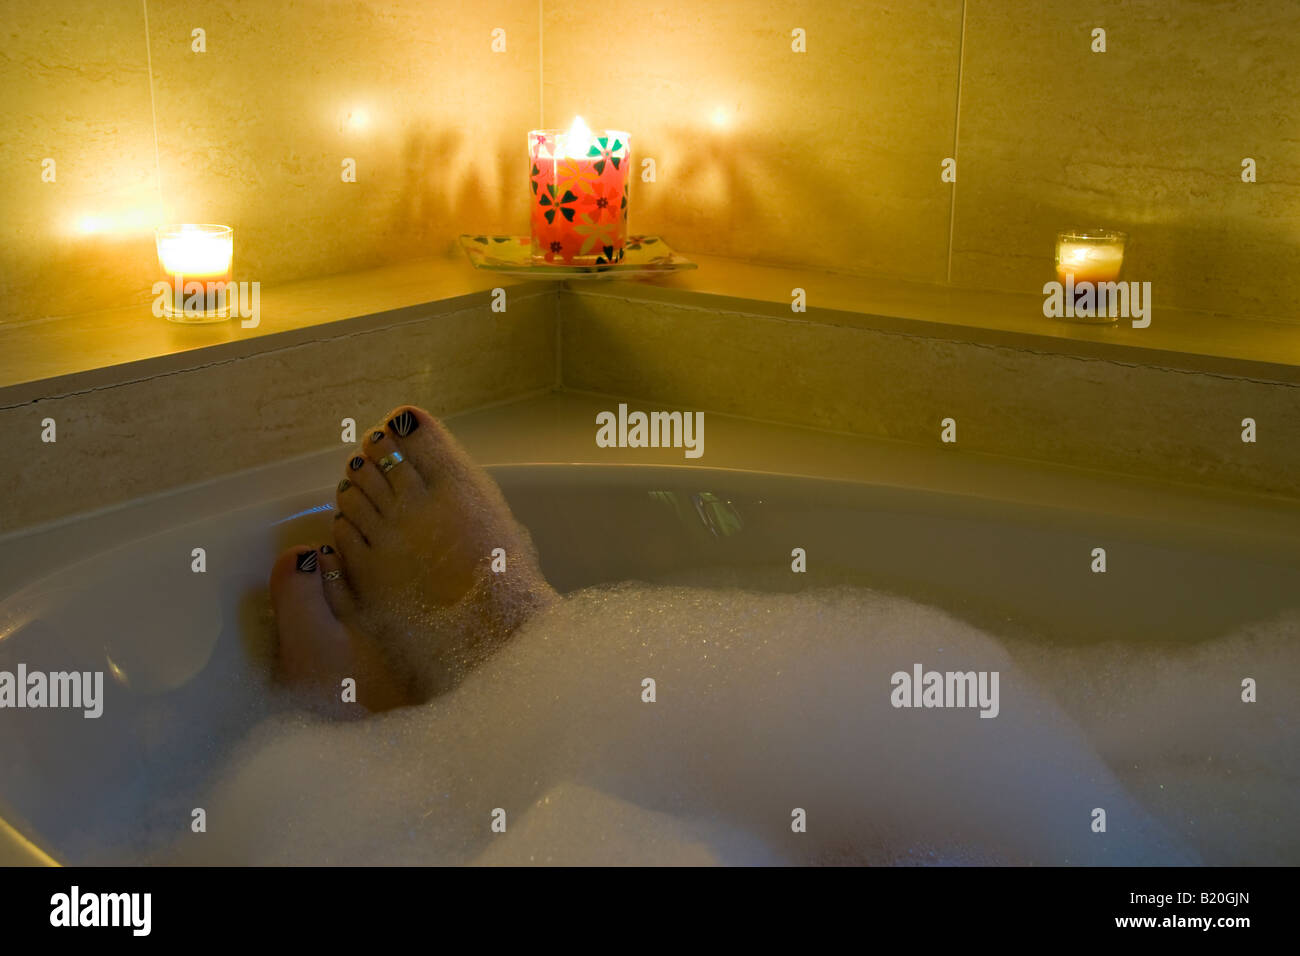 a woman's feet poking through the bubbles in her bath, lit by 3 candles Stock Photo